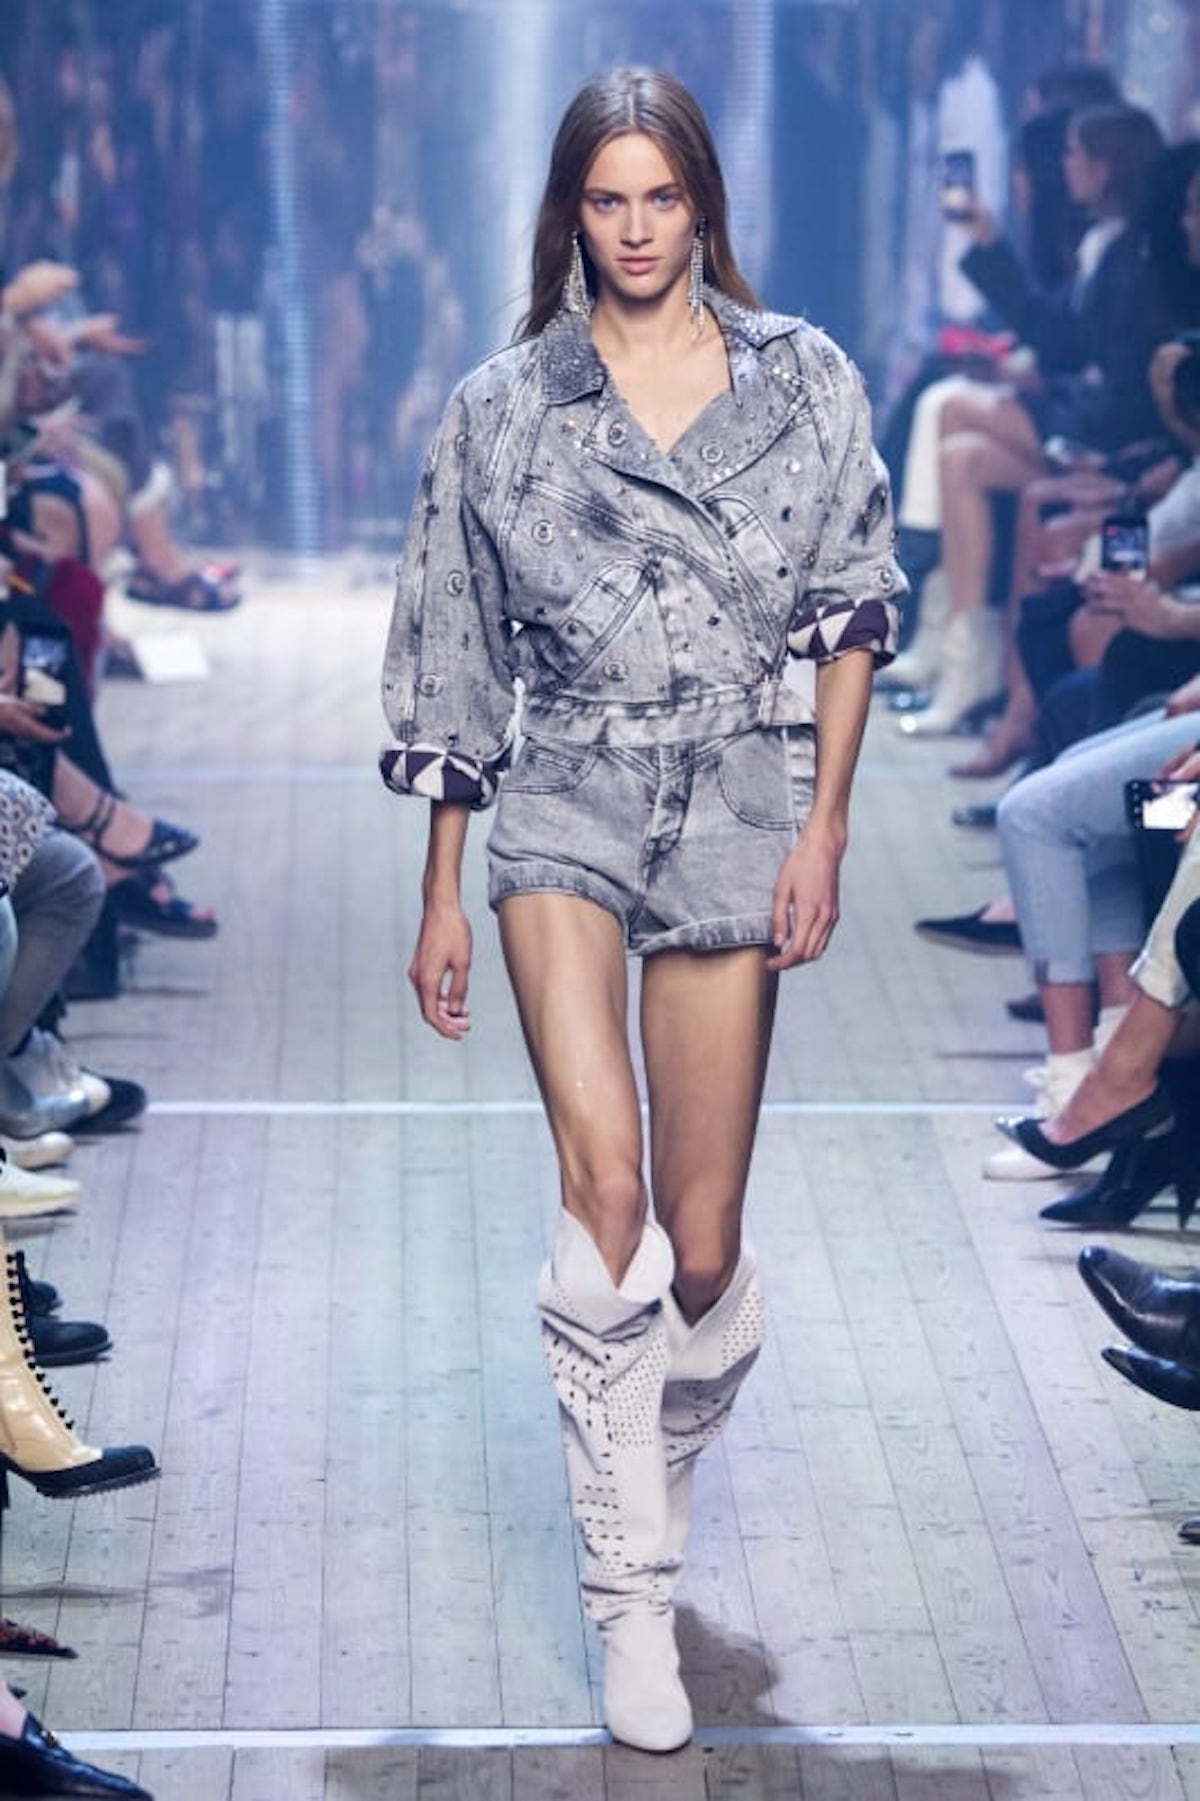 Isabel Marant acid wash jean shorts and jacket on the runway in 2019.